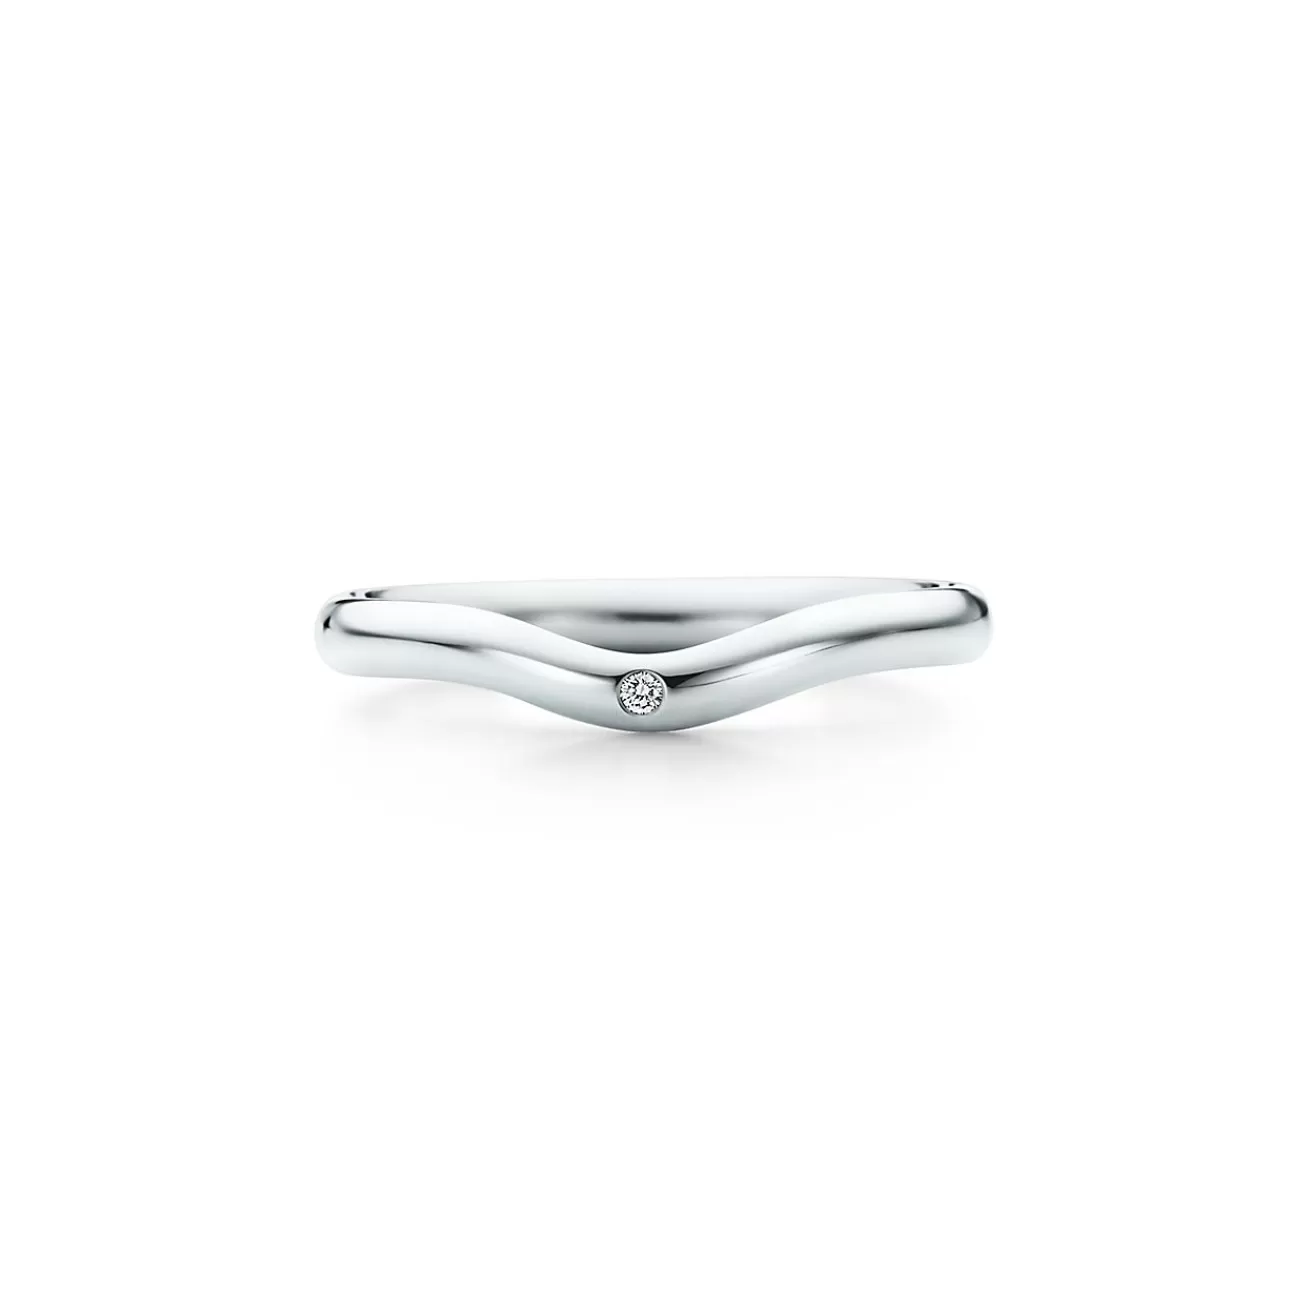 Tiffany & Co. Elsa Peretti® wedding band ring with a diamond in platinum, 2 mm wide. | ^Women Rings | Platinum Jewelry